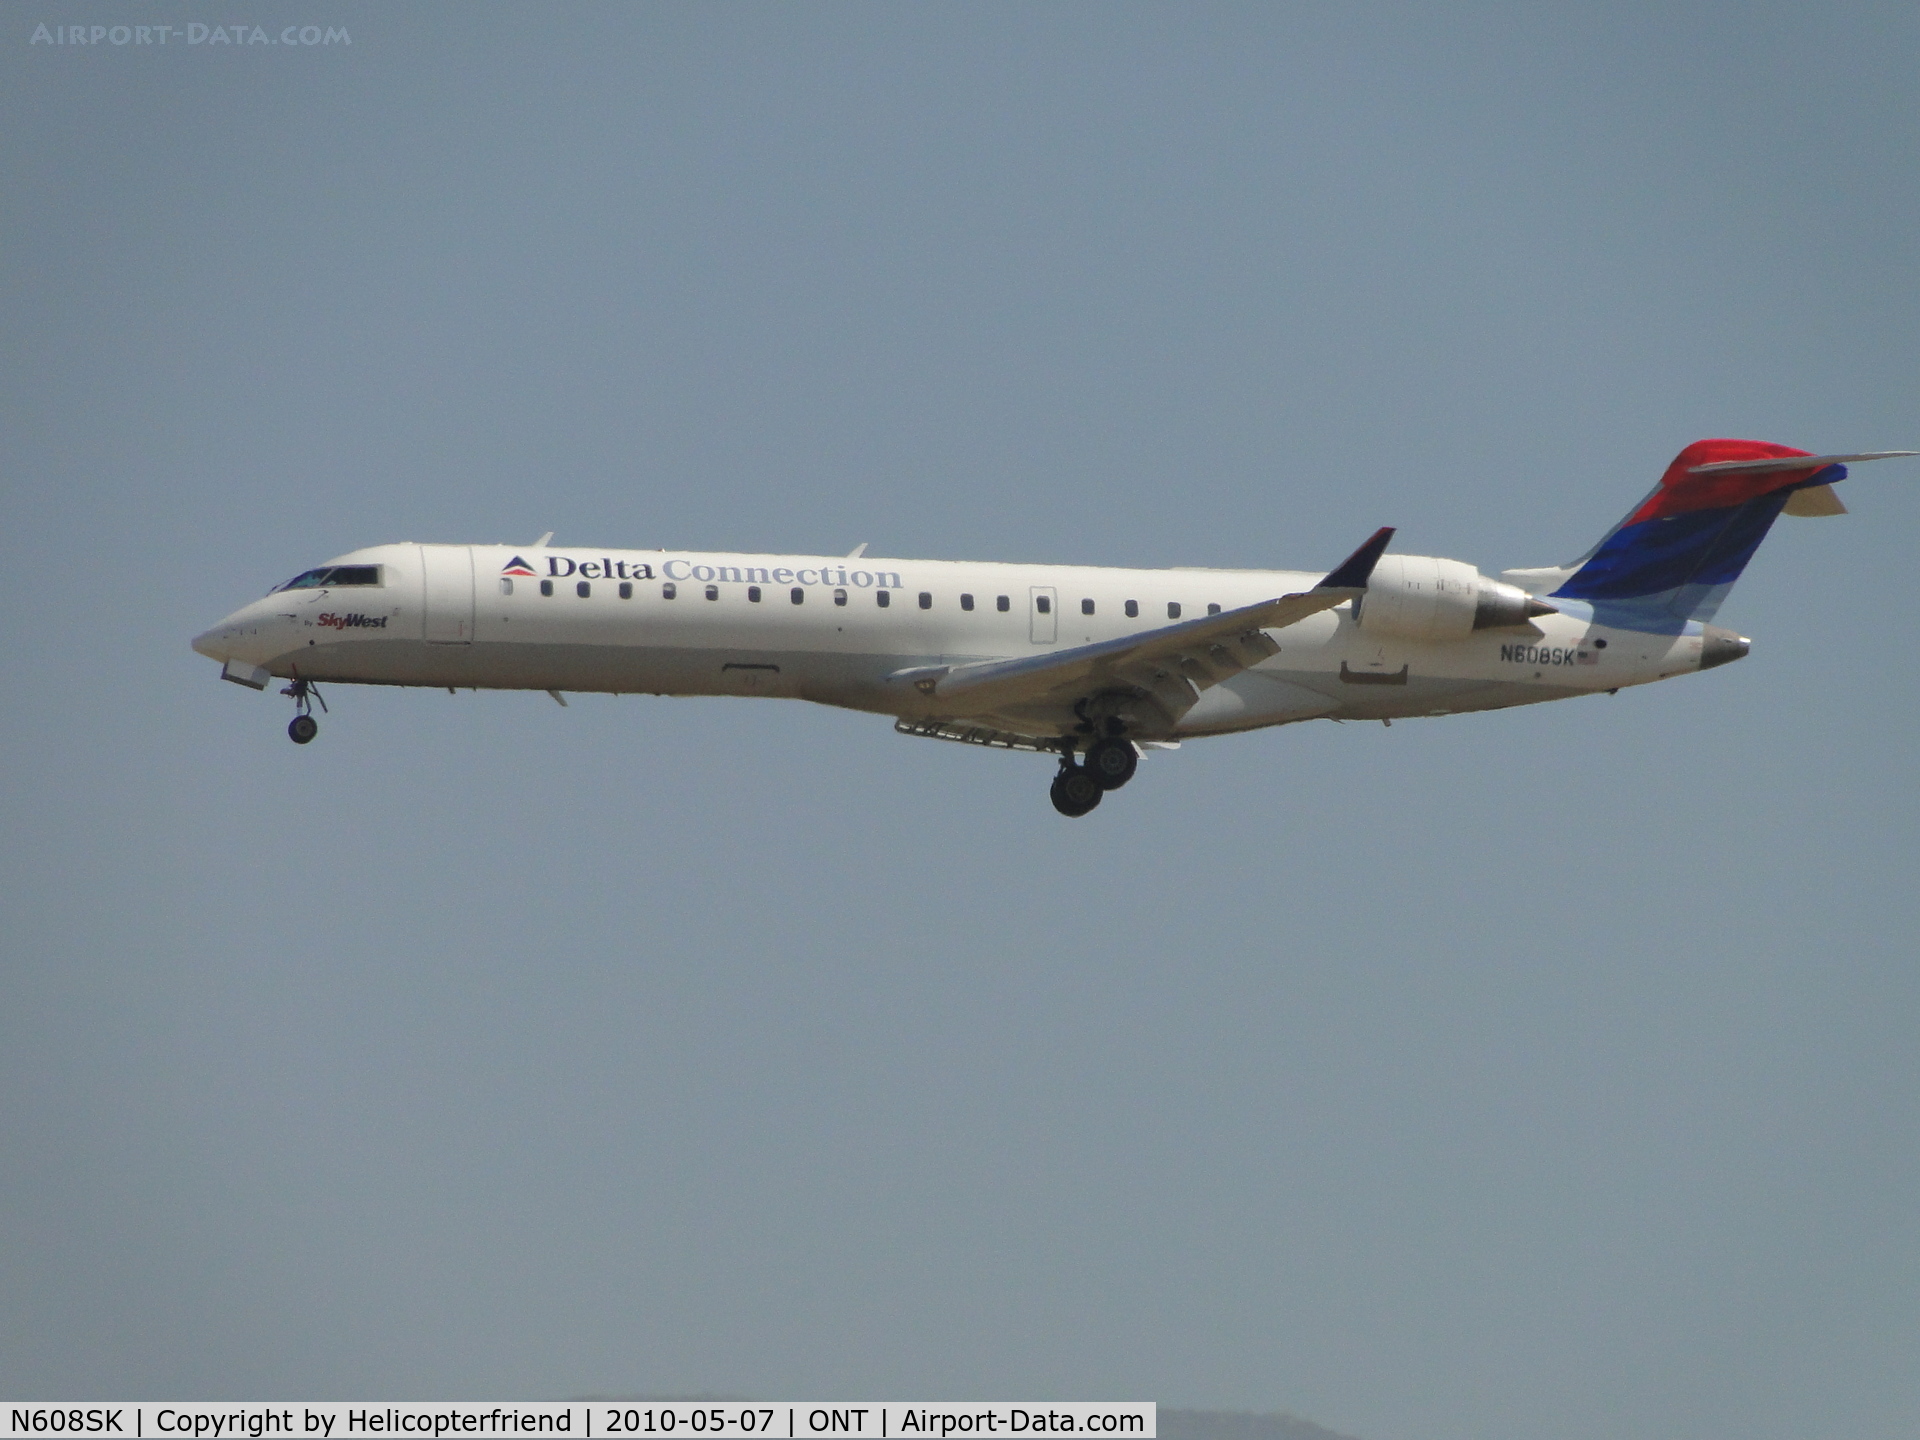 N608SK, 2006 Bombardier CRJ-700 (CL-600-2C10) Regional Jet C/N 10252, Sky West's Delta Airlines Connection on final to runway 26R